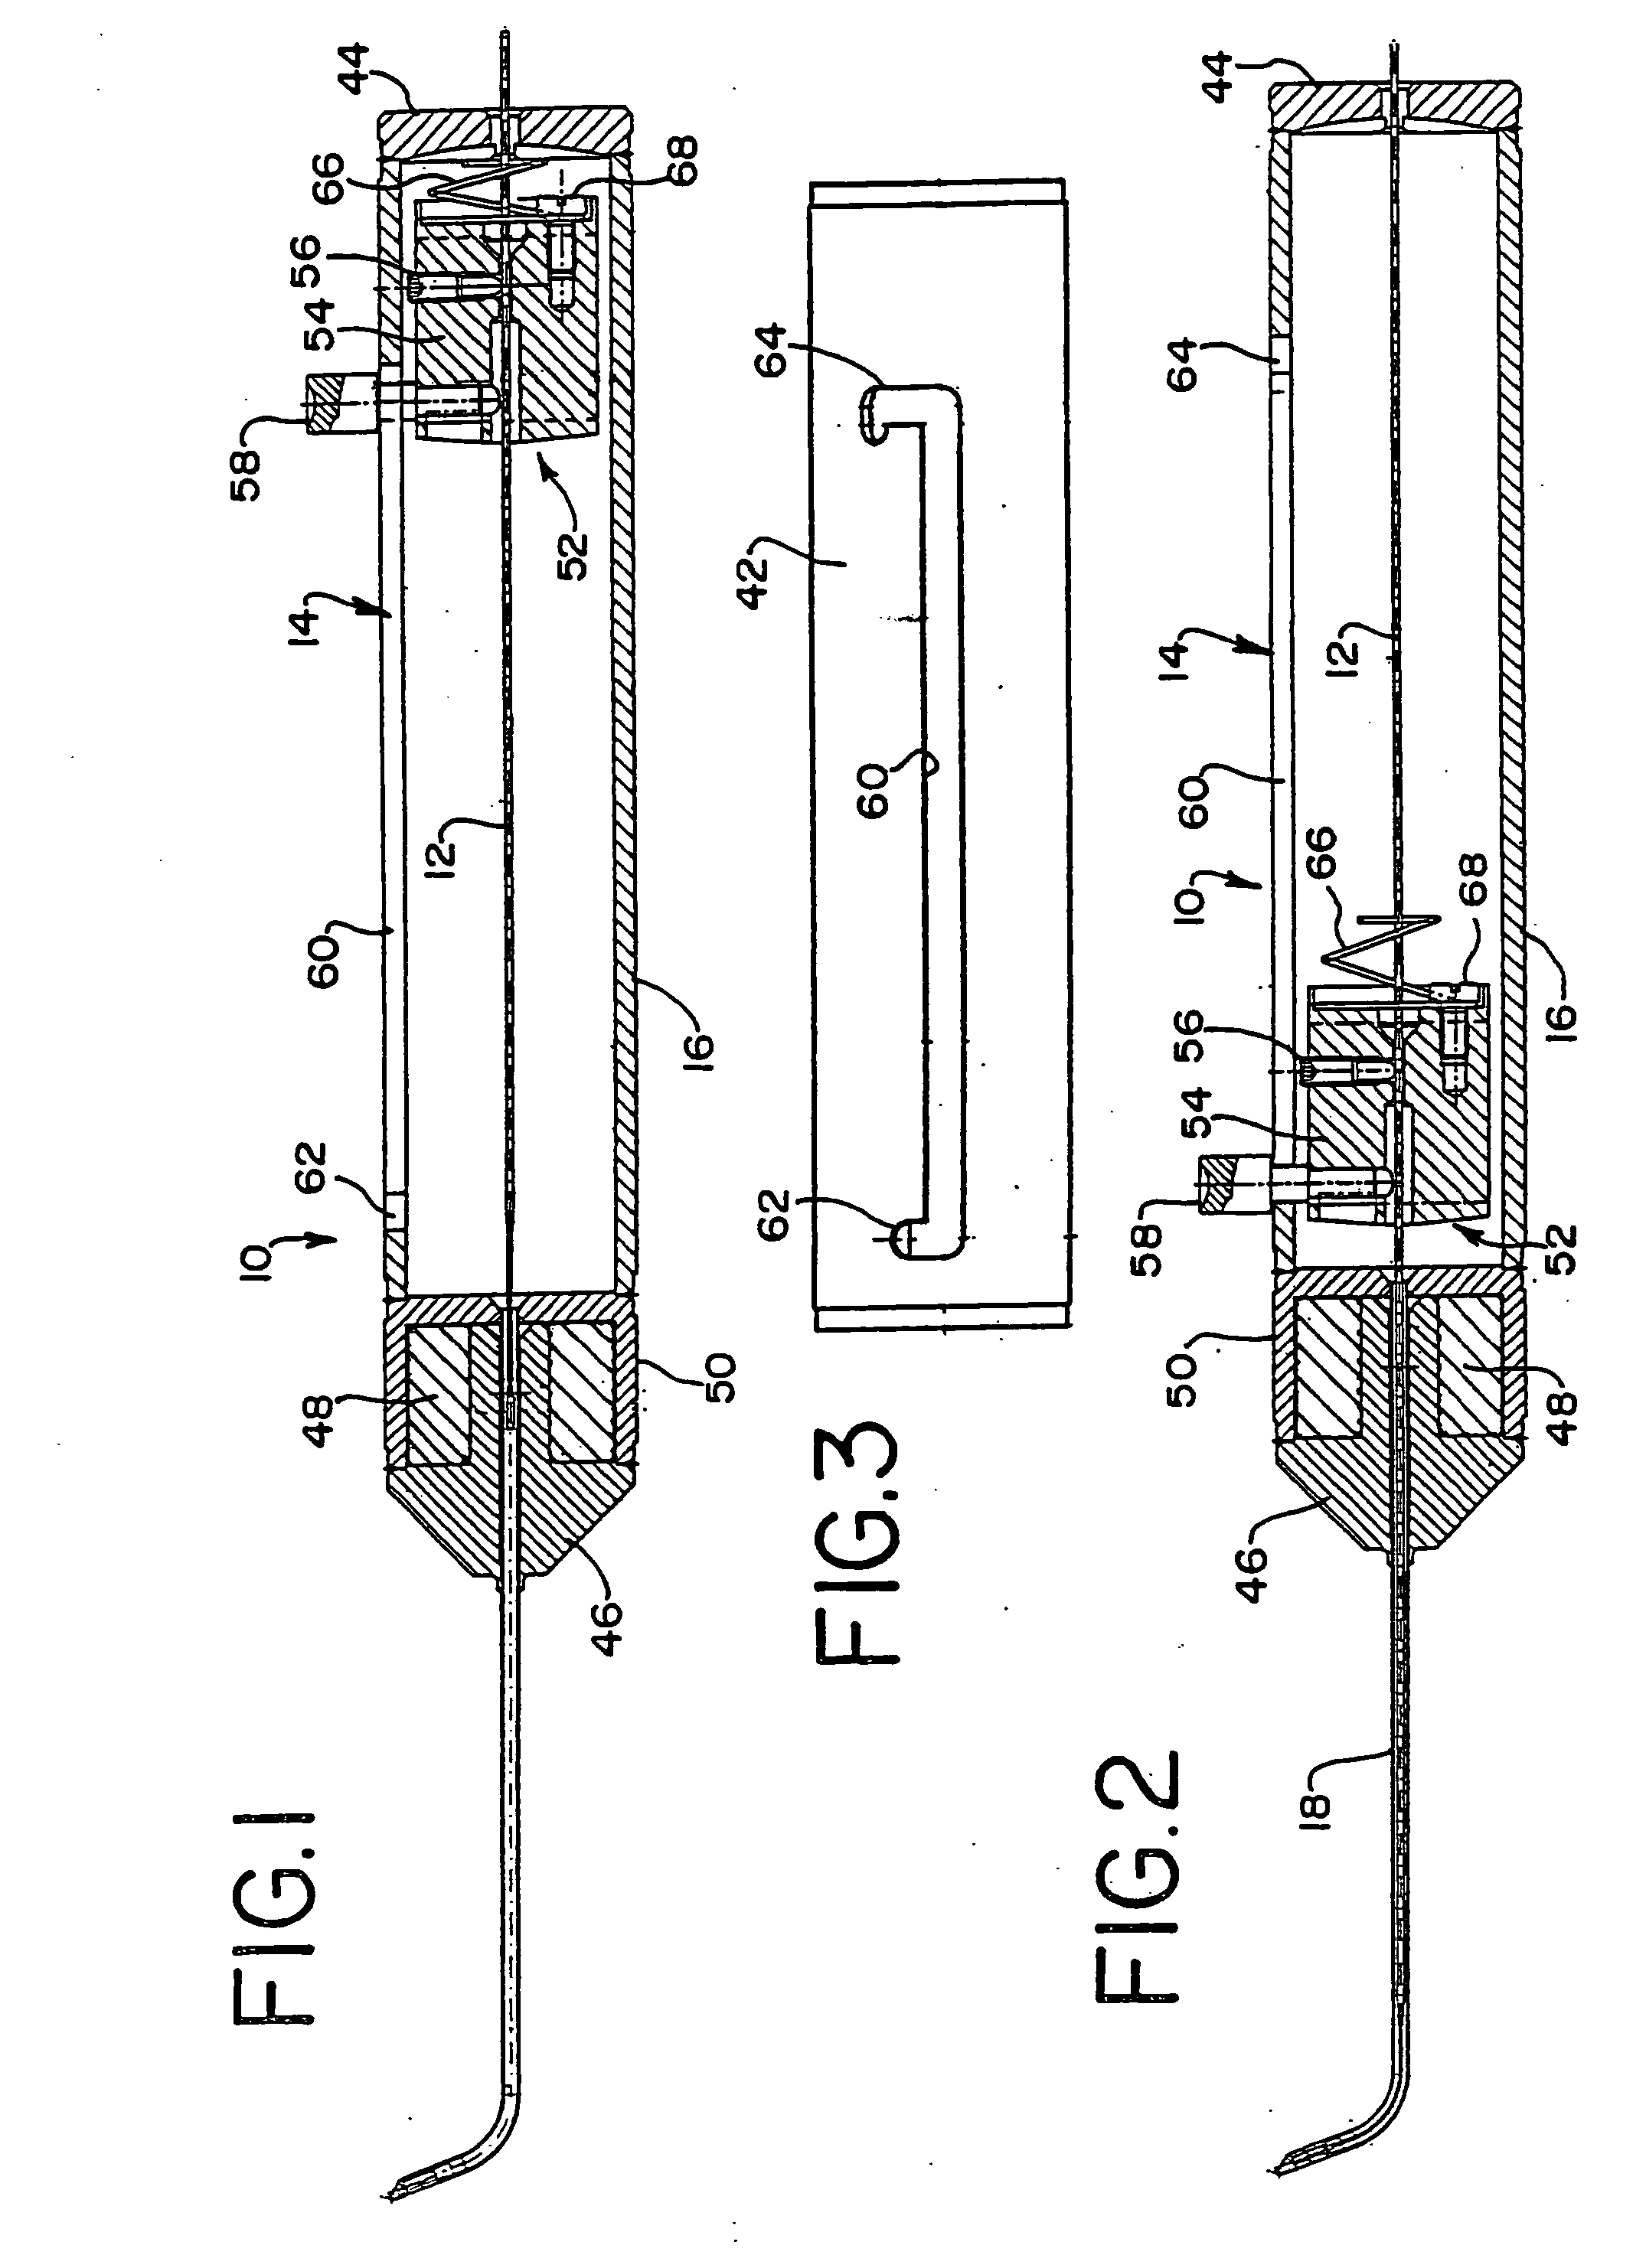 Methods and apparatus for intraocular brachytherapy